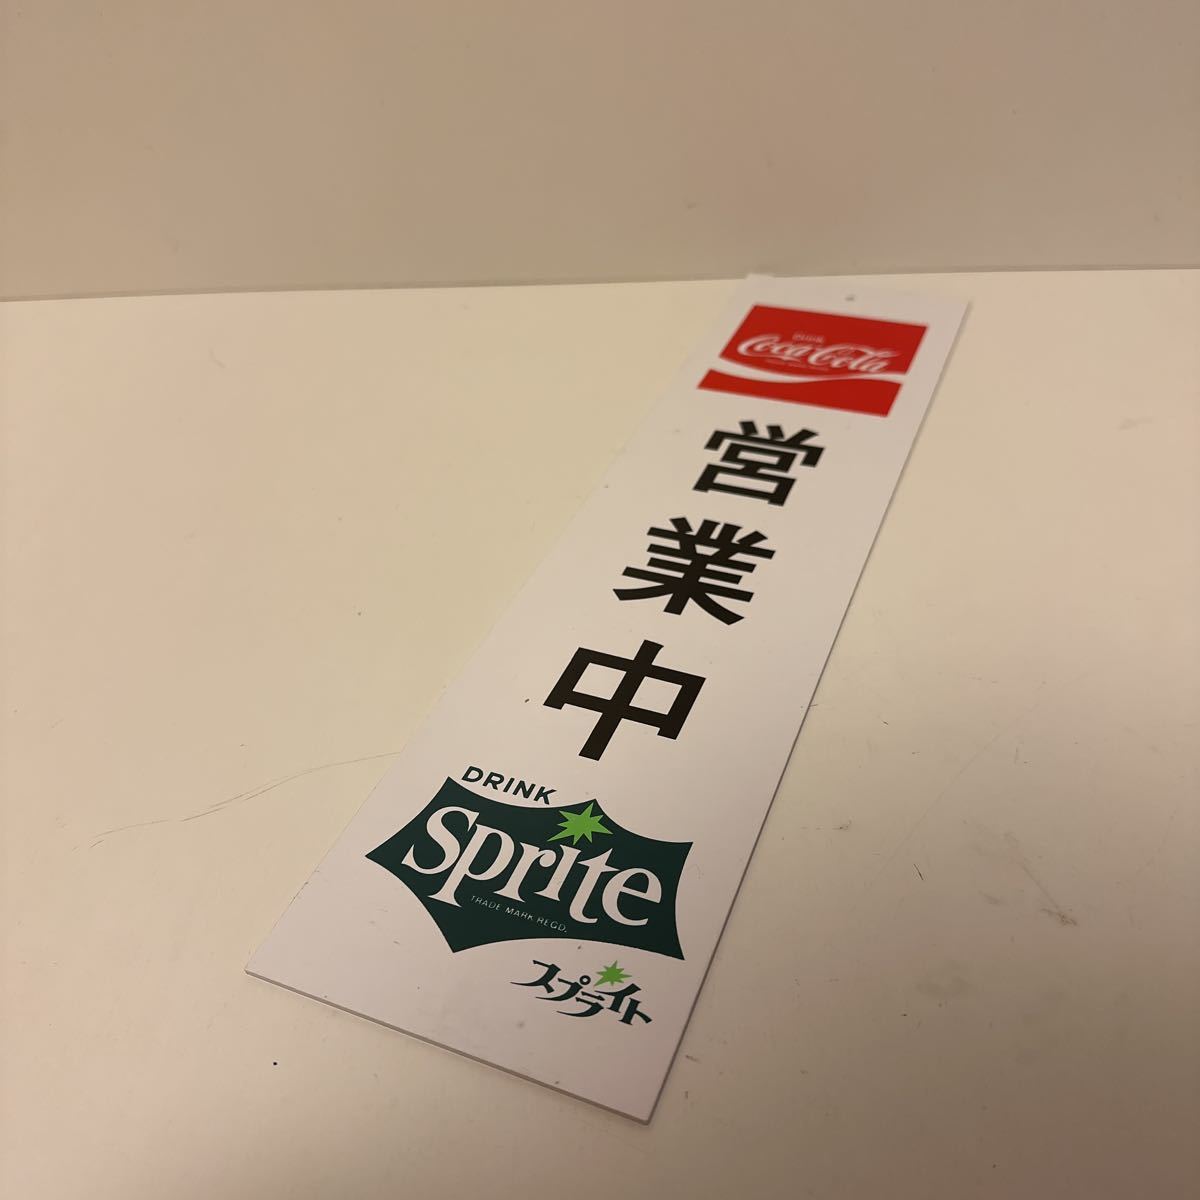  Coca Cola sprite preparation middle business middle plate signboard 